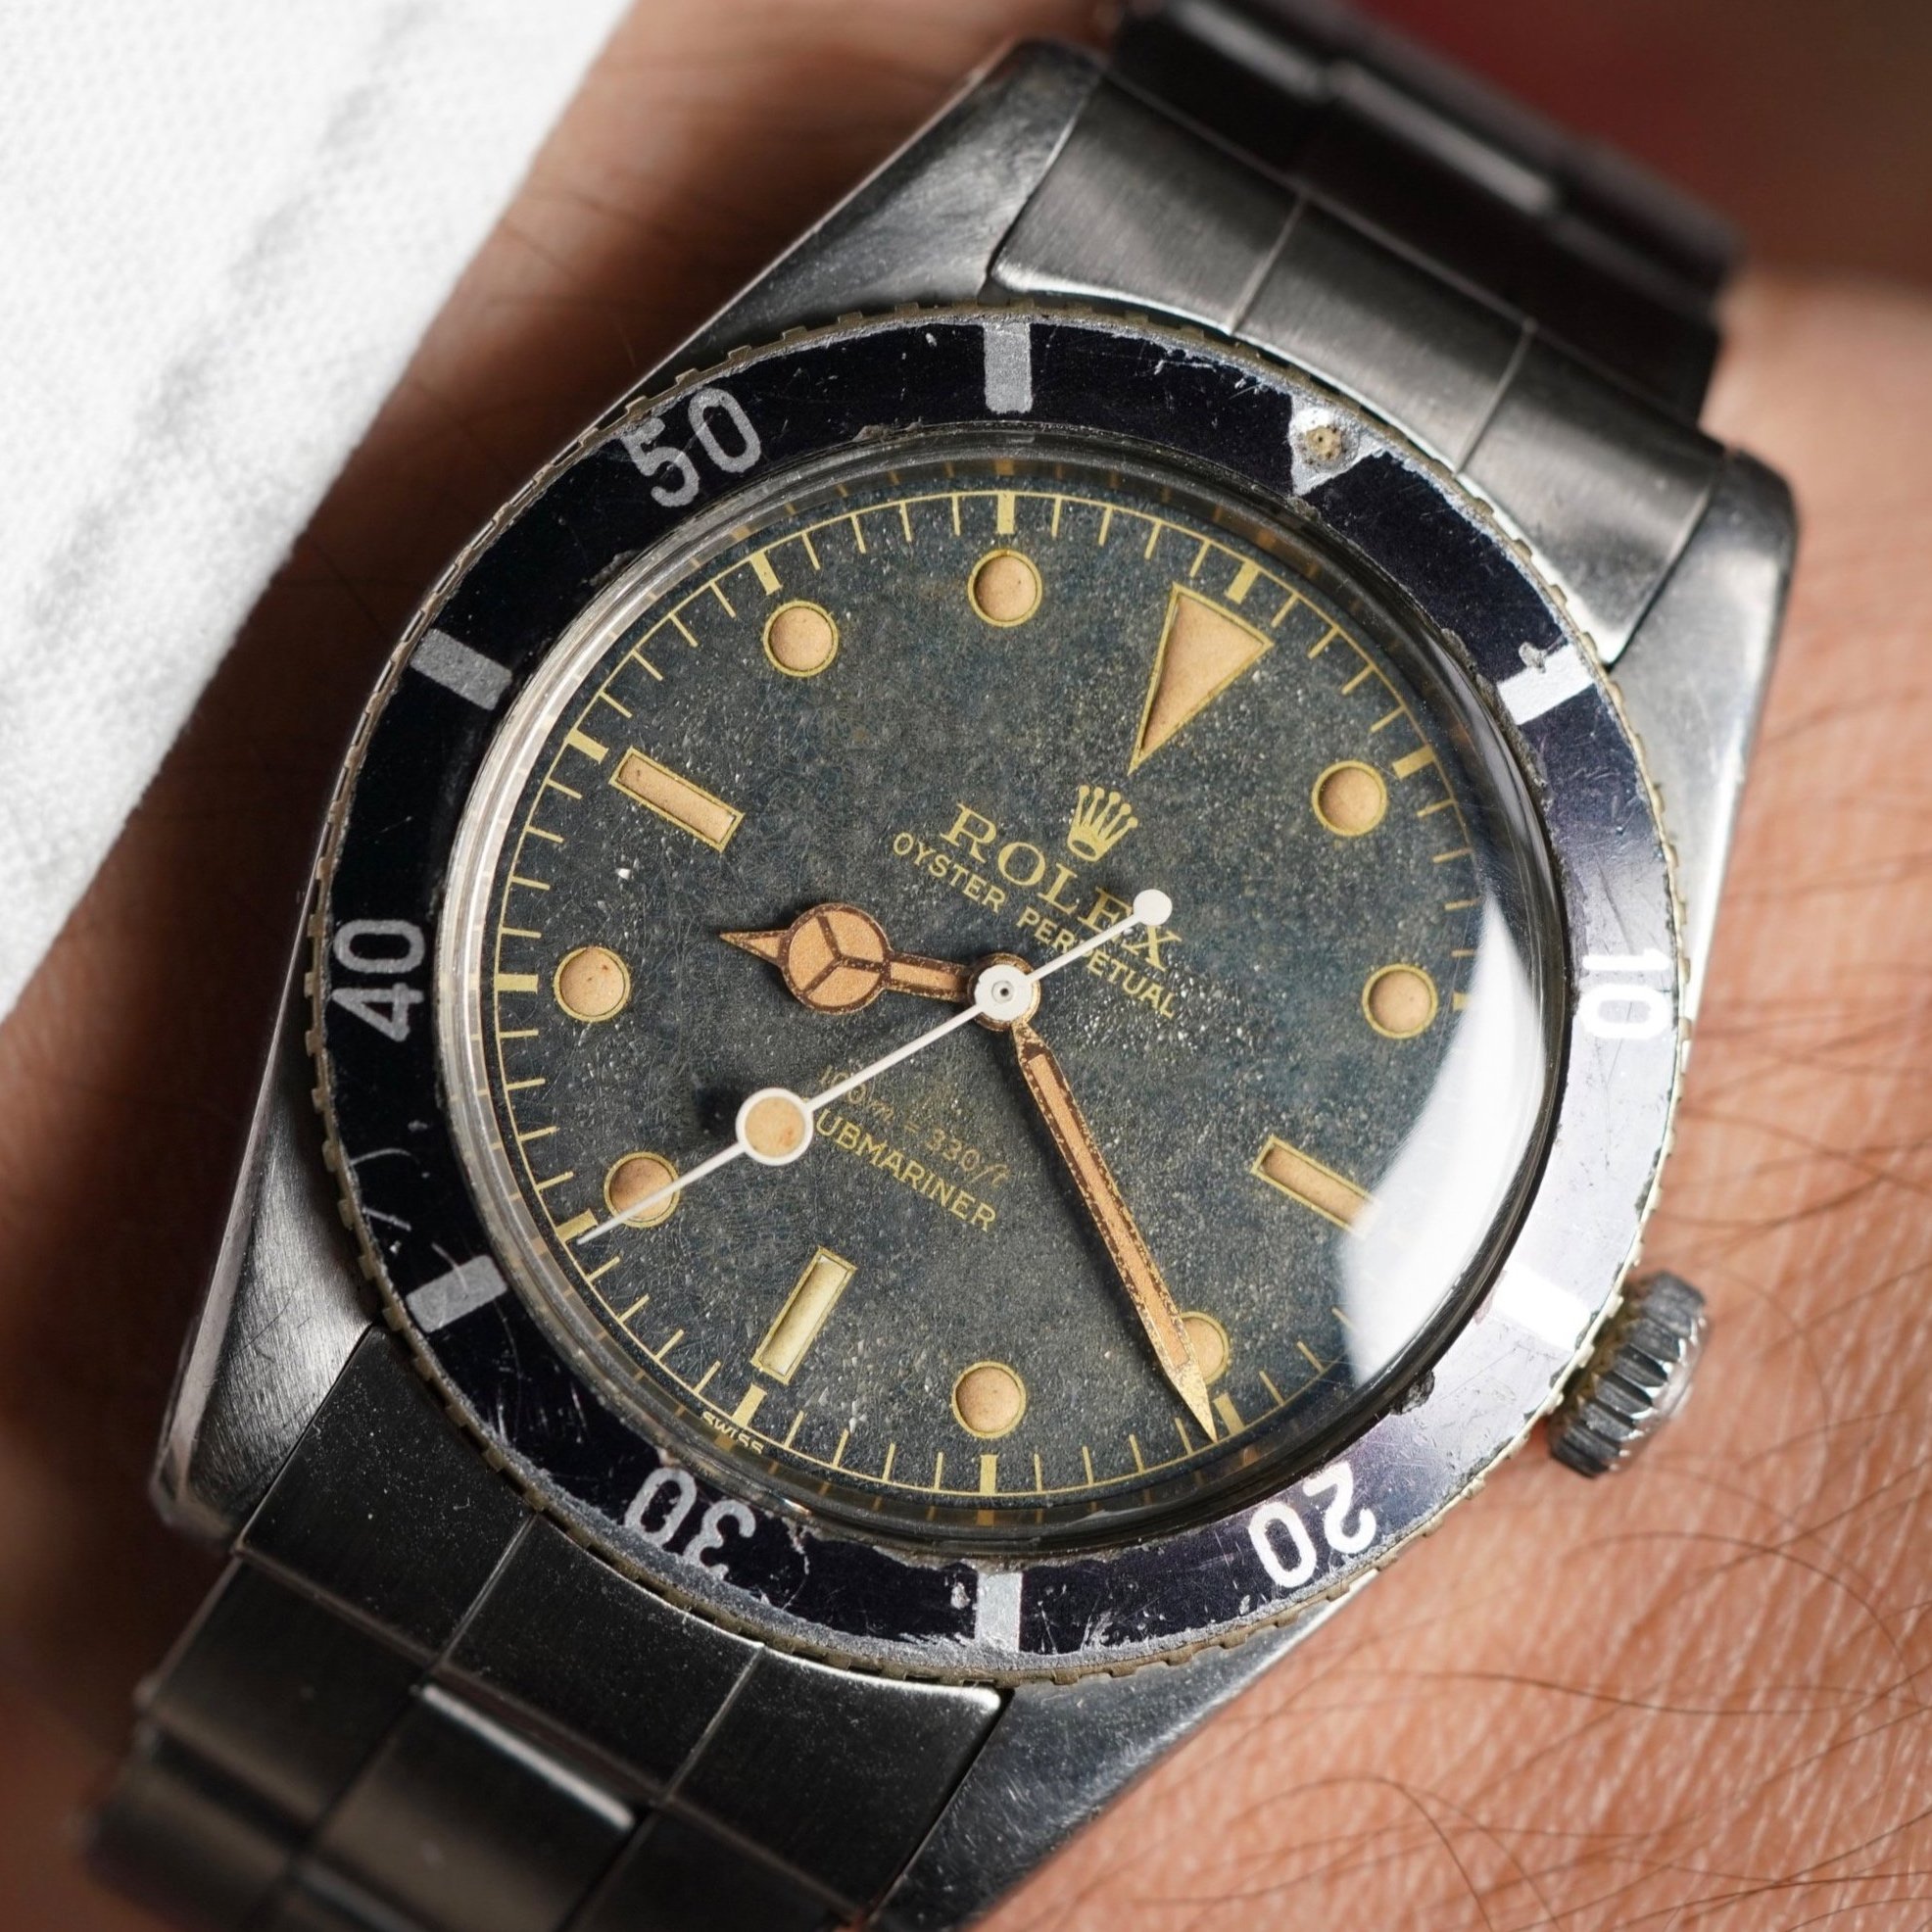 Rolex Small Crown Submariner Reference 6536/1 